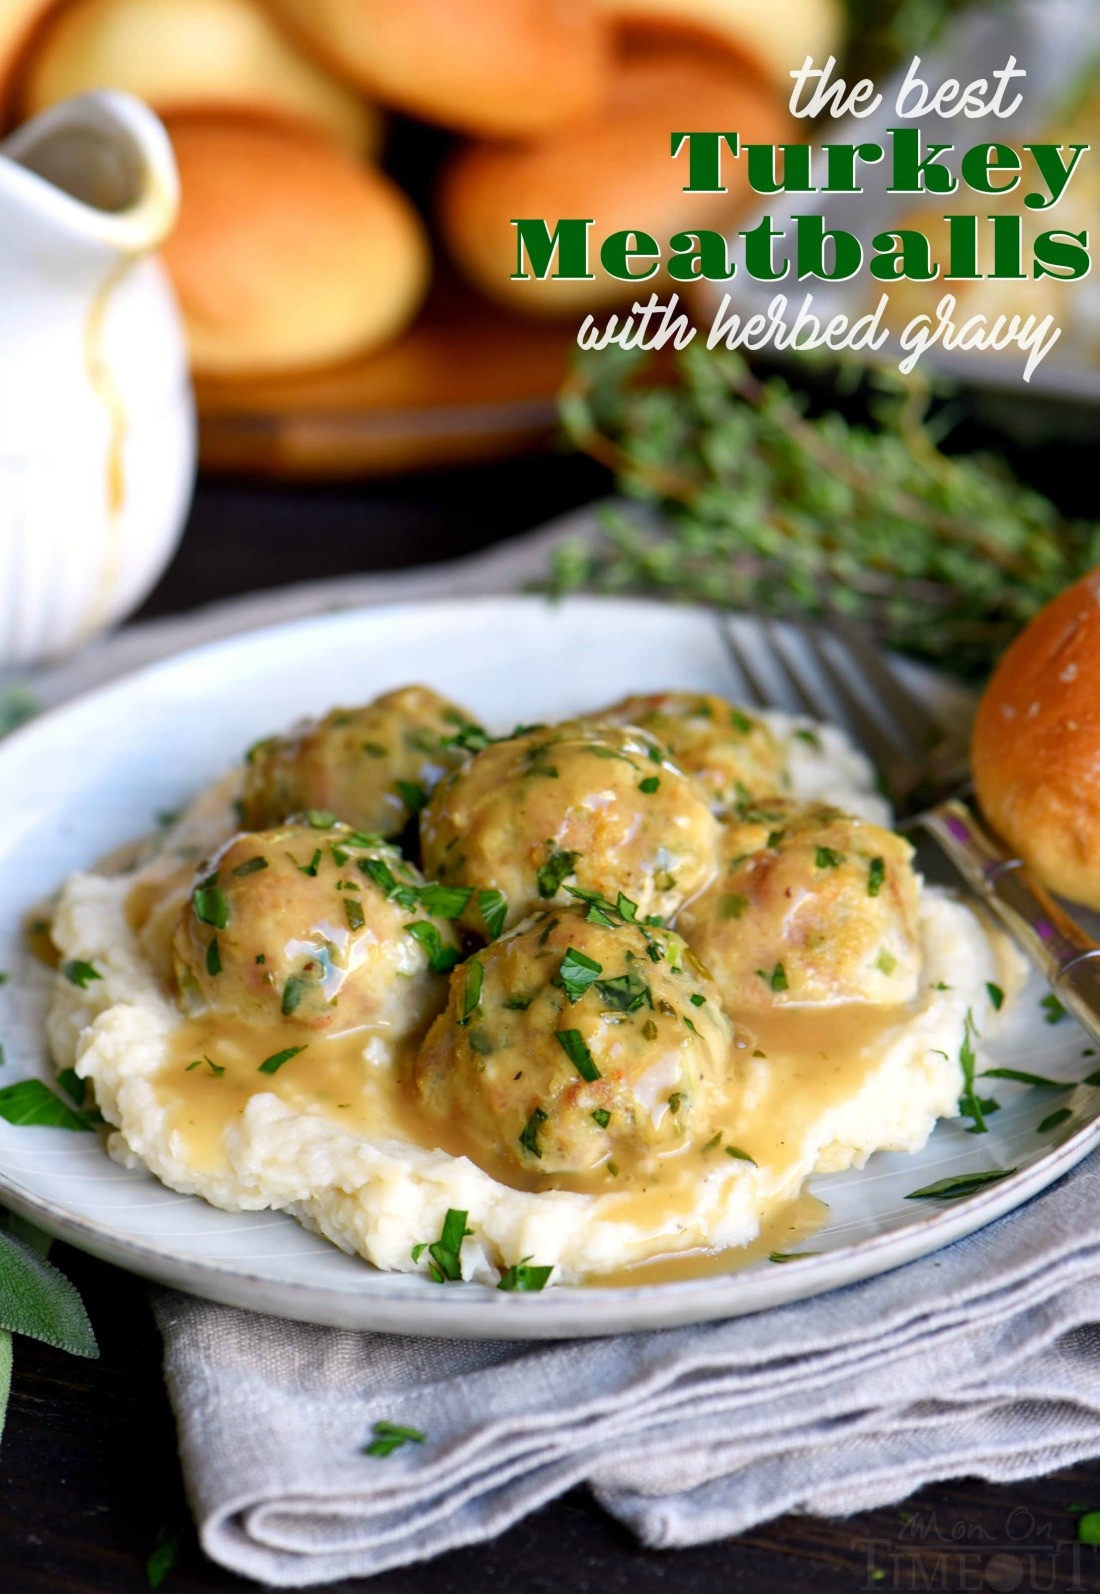 Thanksgiving Turkey Meatballs
 The BEST Turkey Meatballs with Herbed Gravy Mom Timeout